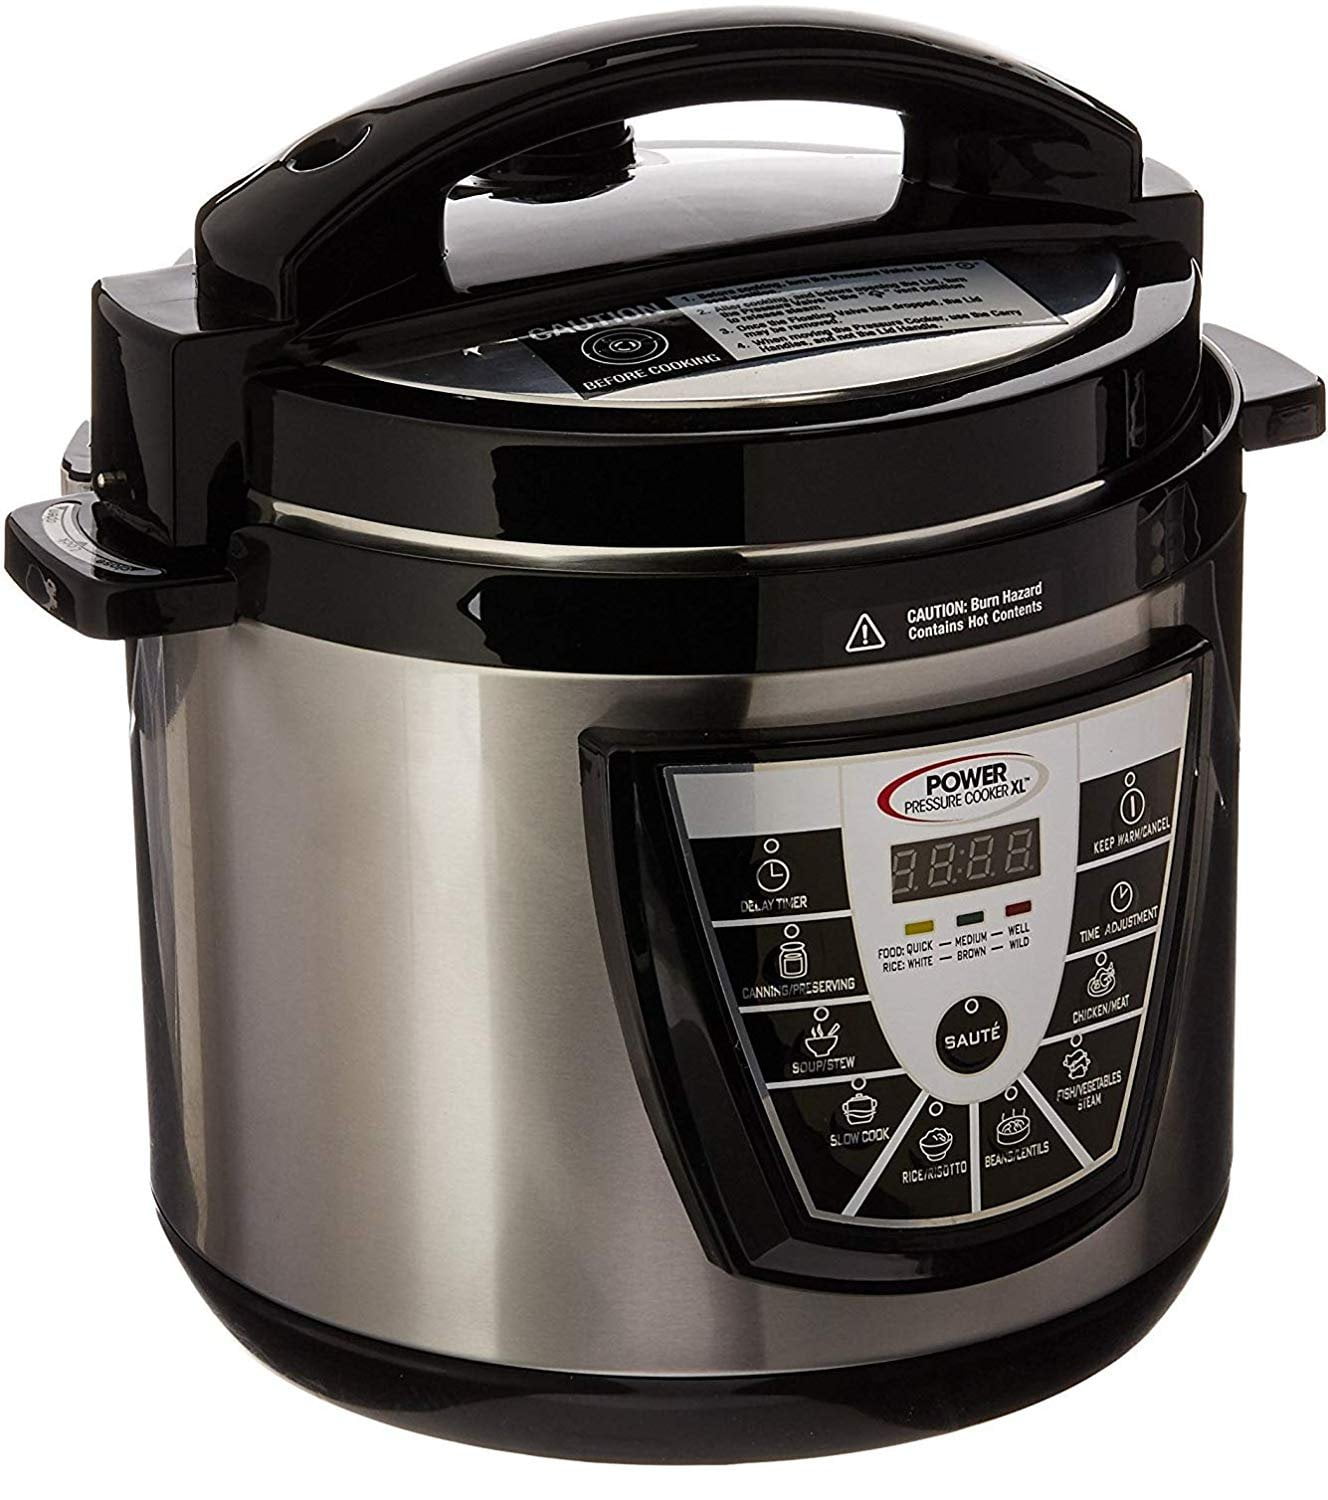 Cooking With Power Pressure Cooker XL: Discover Easy And Healthy